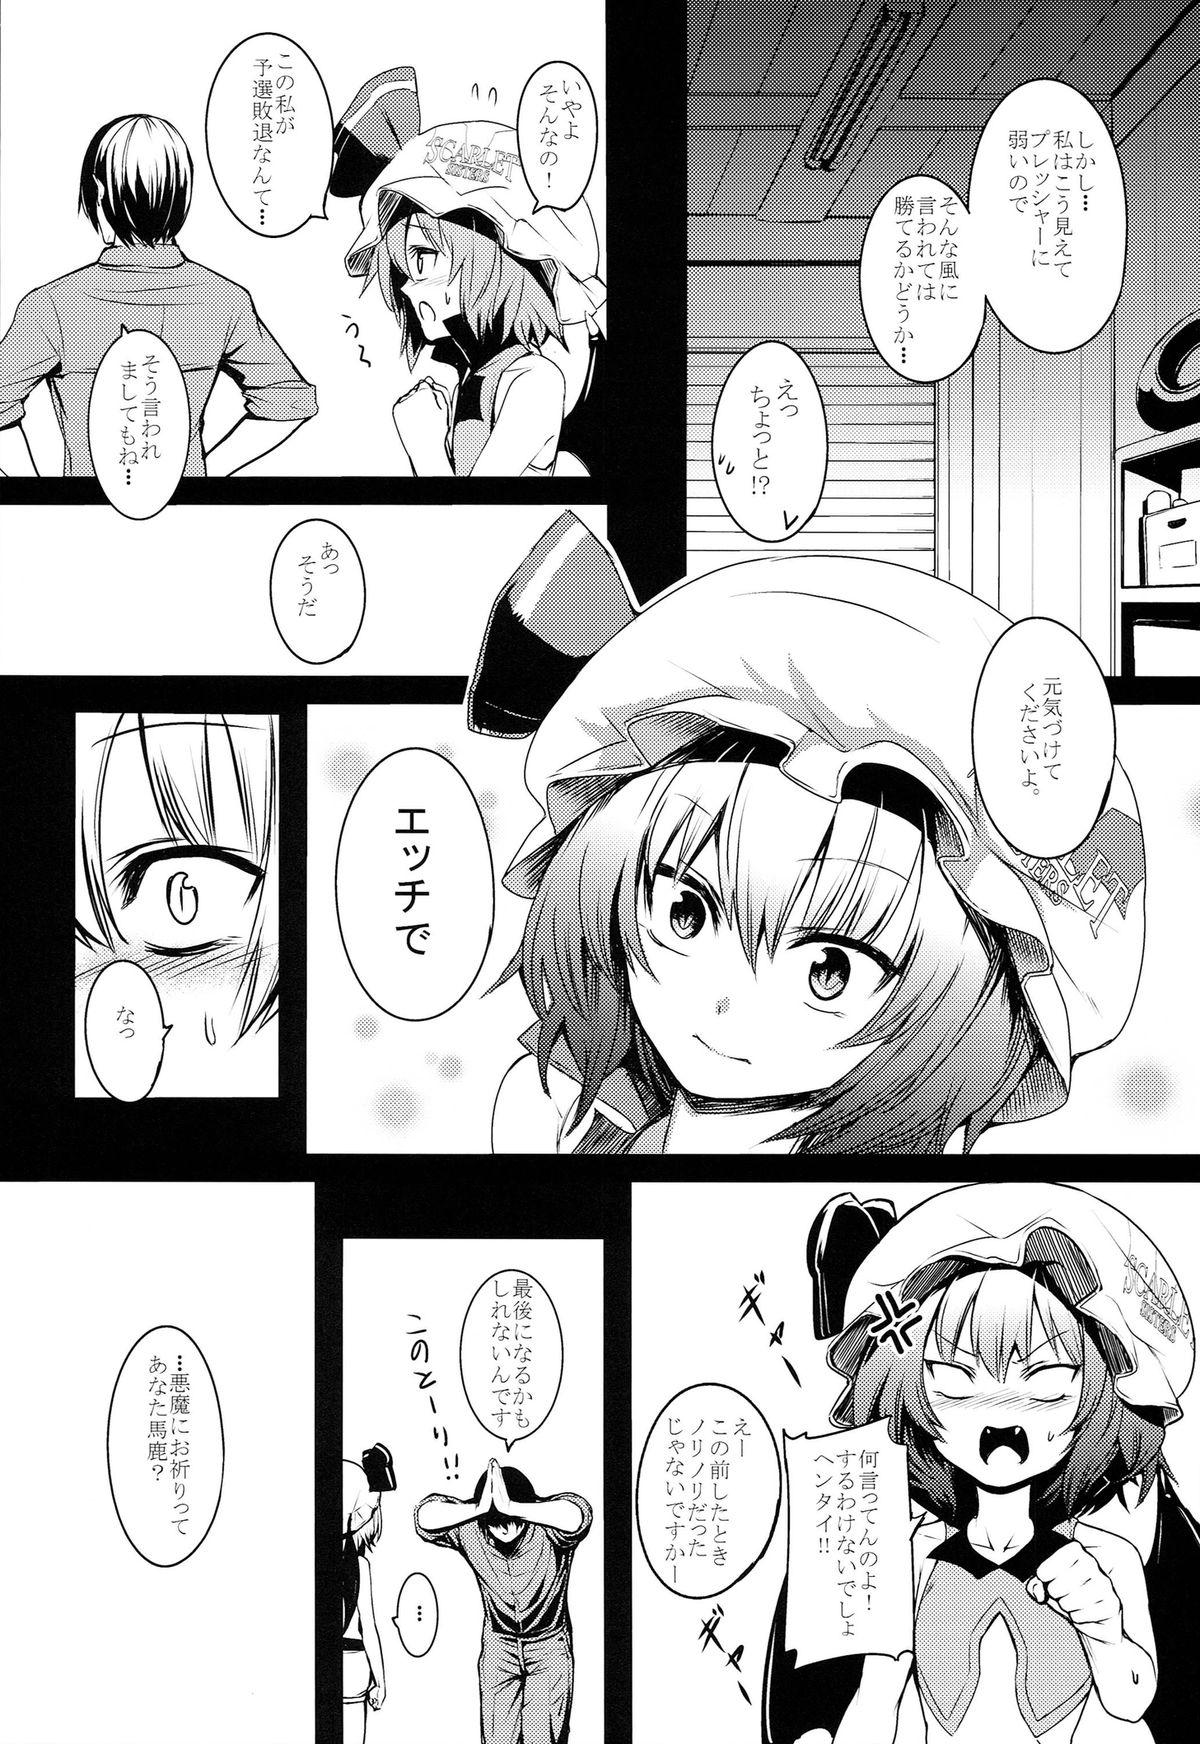 Redhead TOUHOU RACE QUEENS COLLABO CLUB - Touhou project Nigeria - Page 5